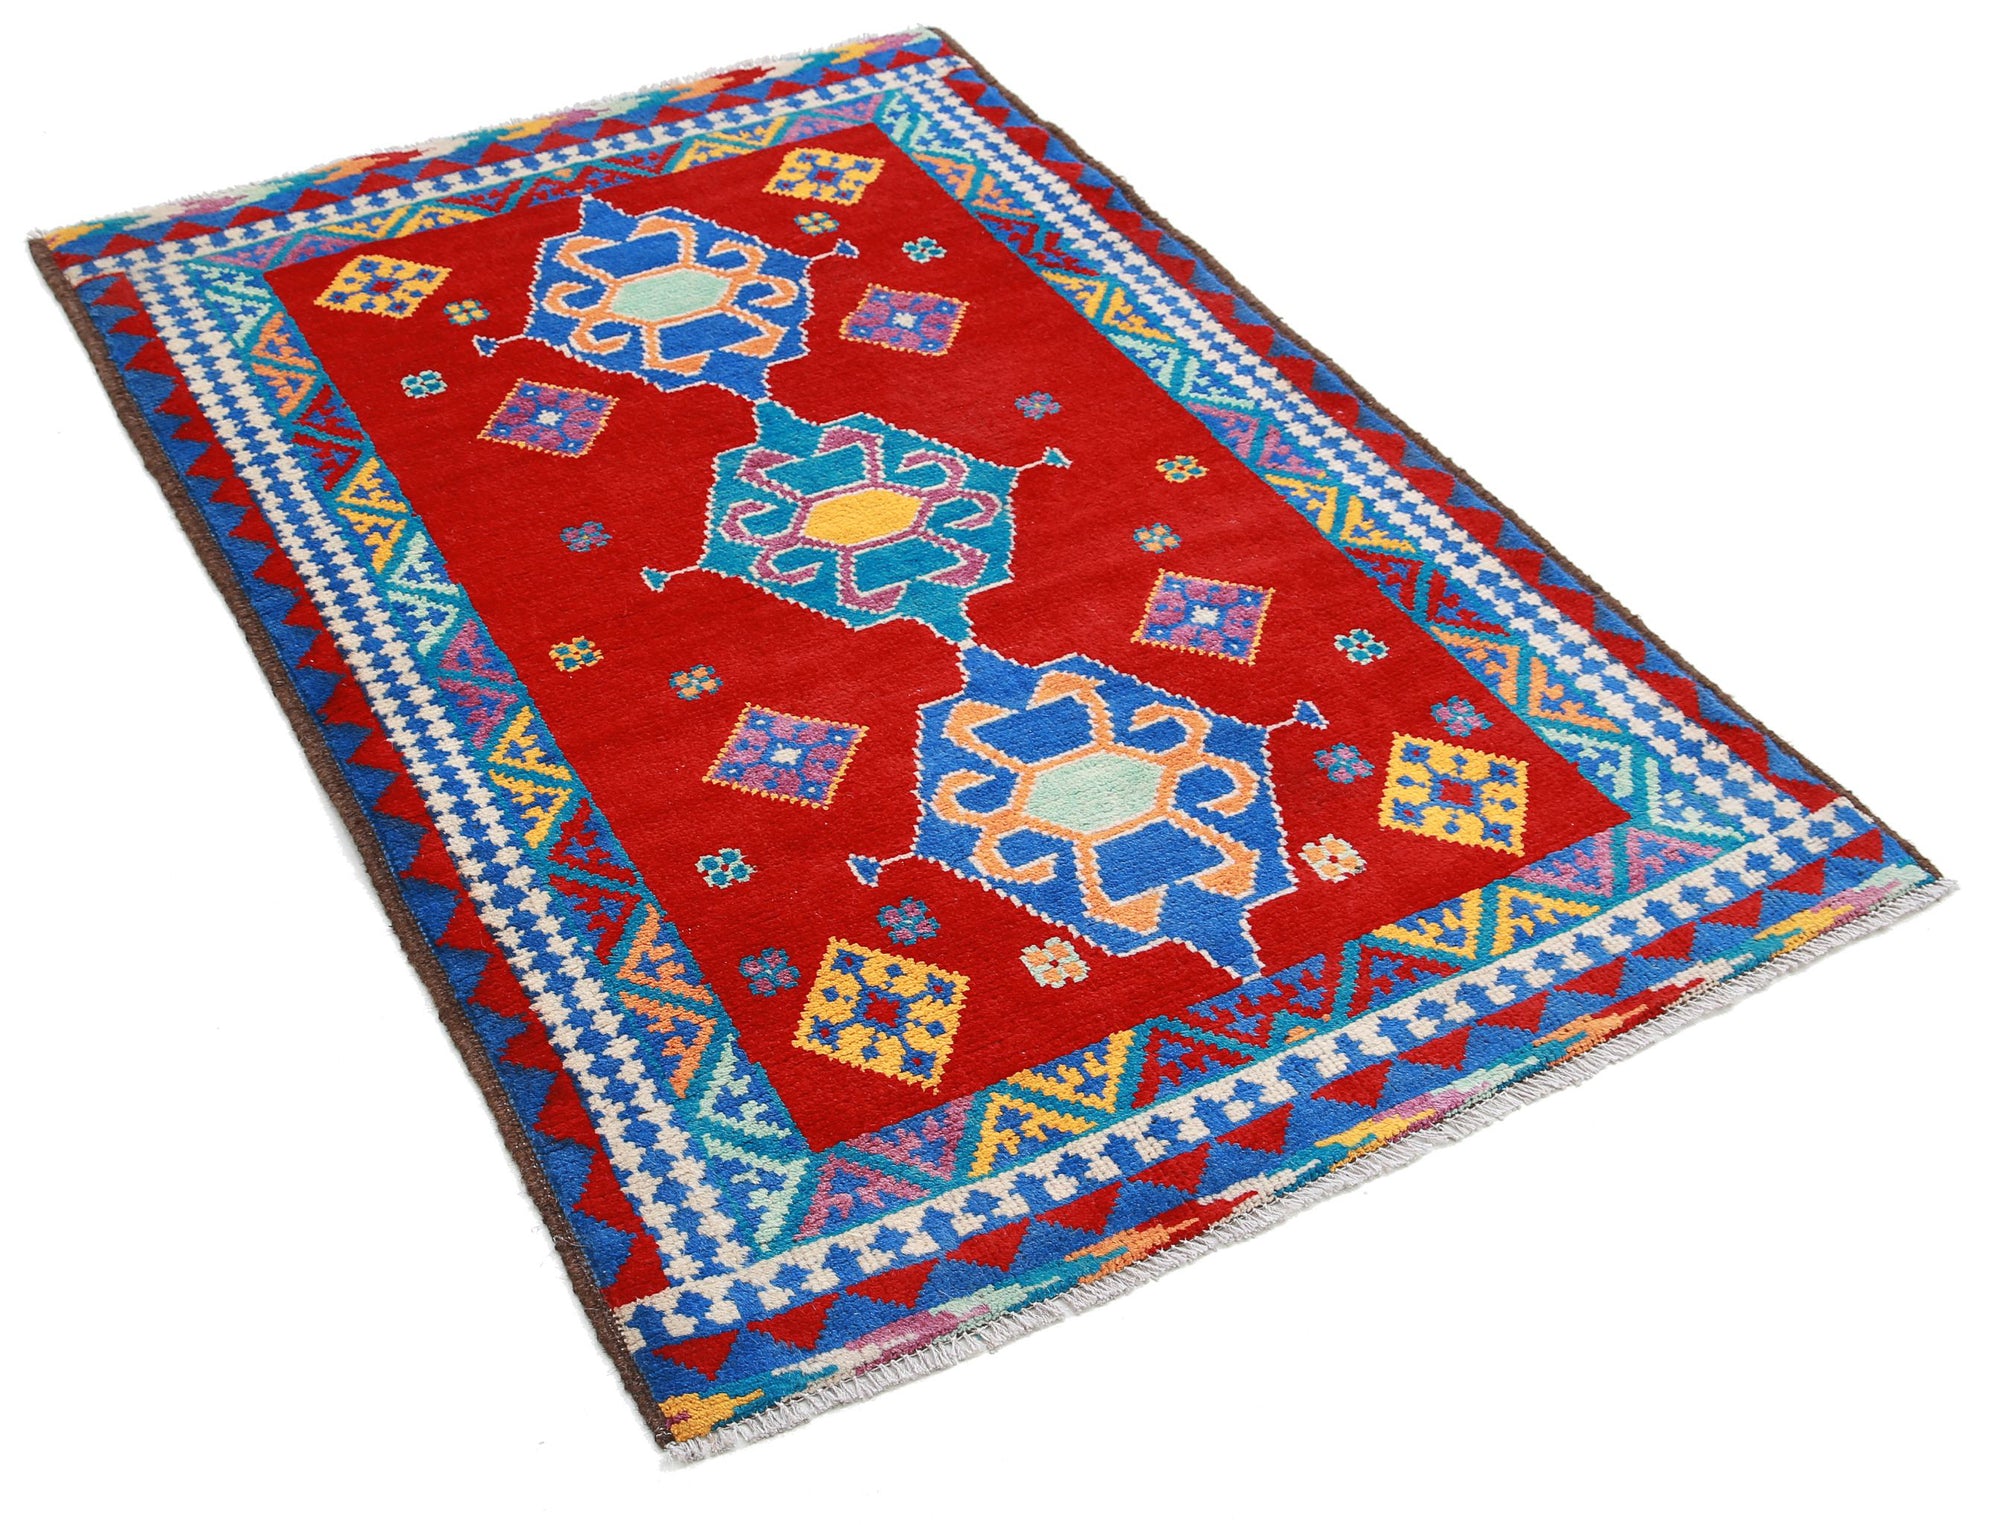 Revival-hand-knotted-qarghani-wool-rug-5014205-1.jpg